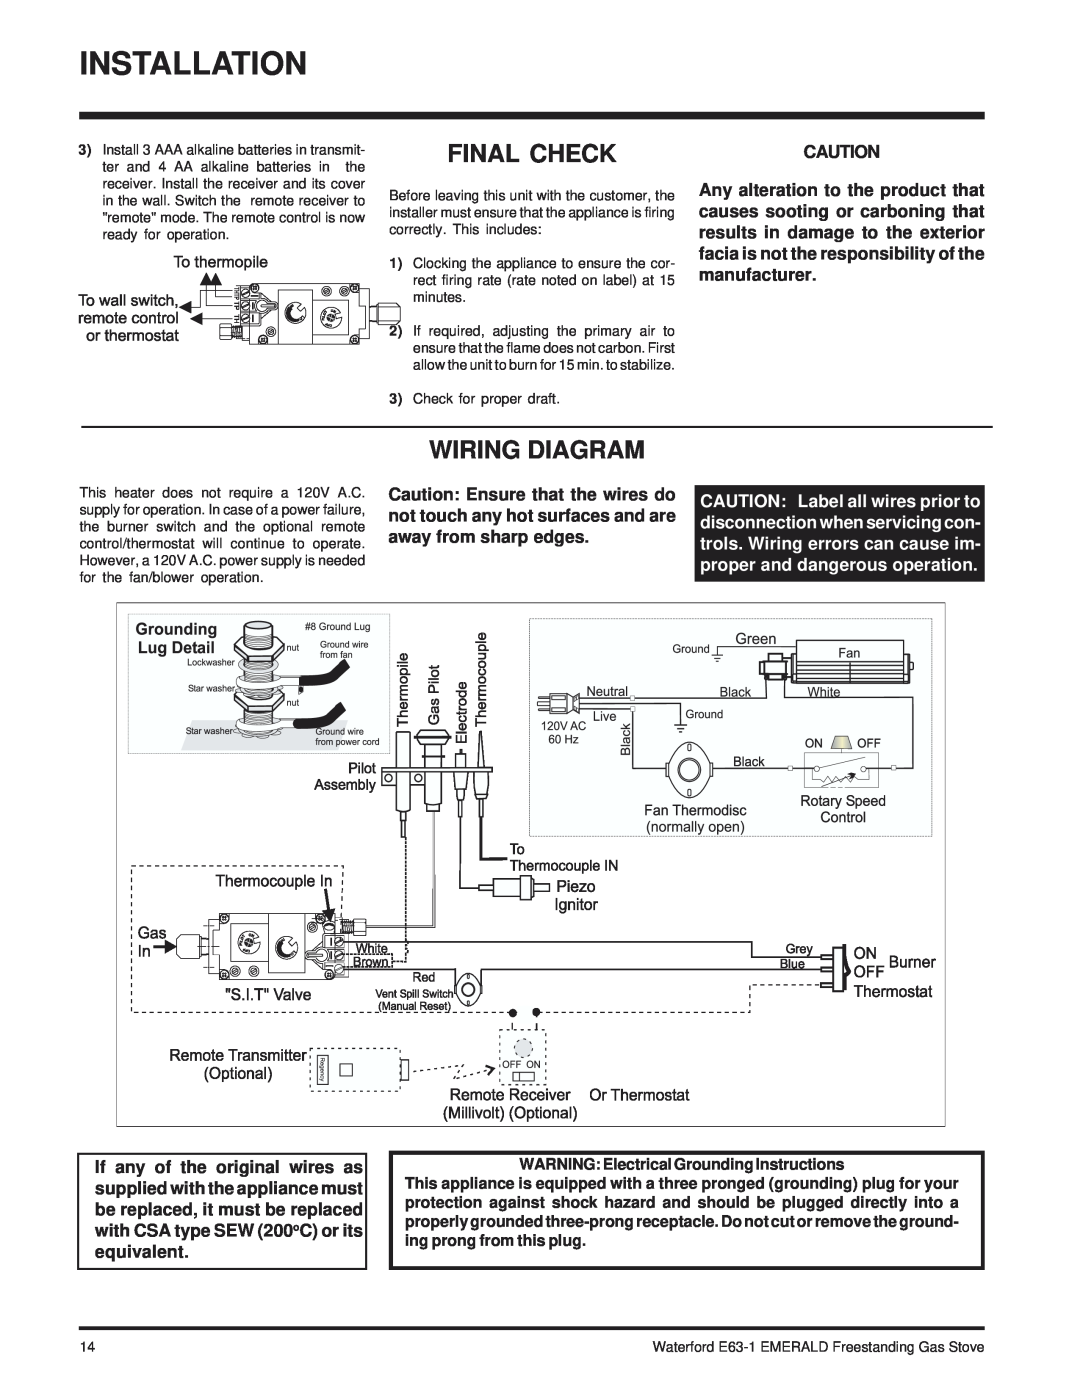 Waterford Appliances E63-NG1 installation manual Final Check, Wiring Diagram, WARNING Electrical Grounding Instructions 